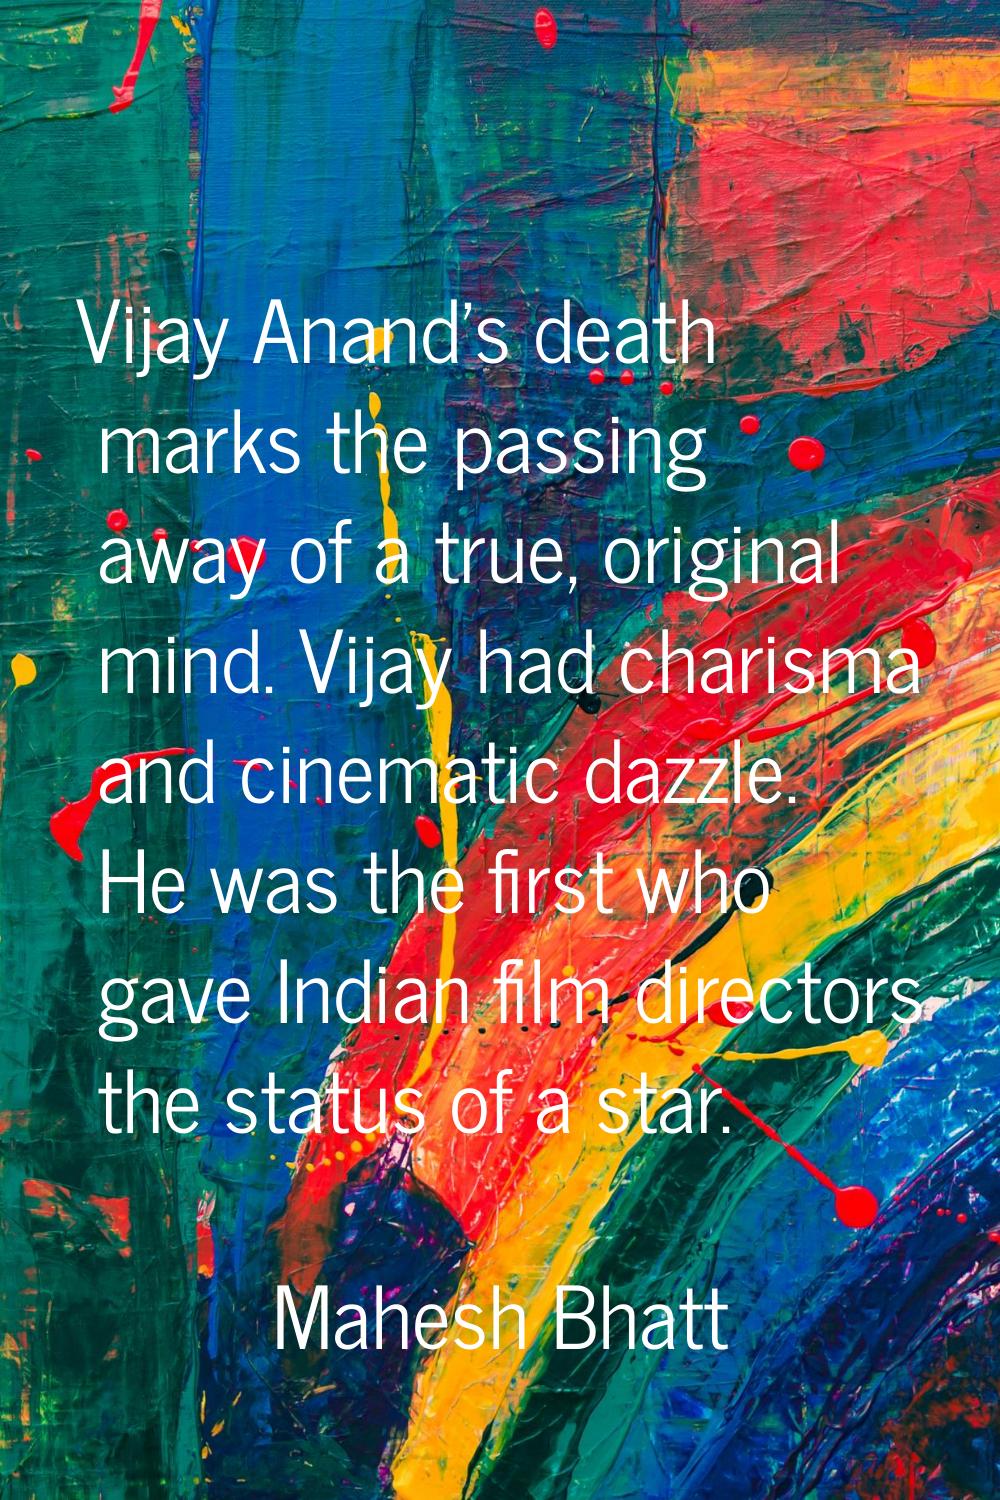 Vijay Anand's death marks the passing away of a true, original mind. Vijay had charisma and cinemat